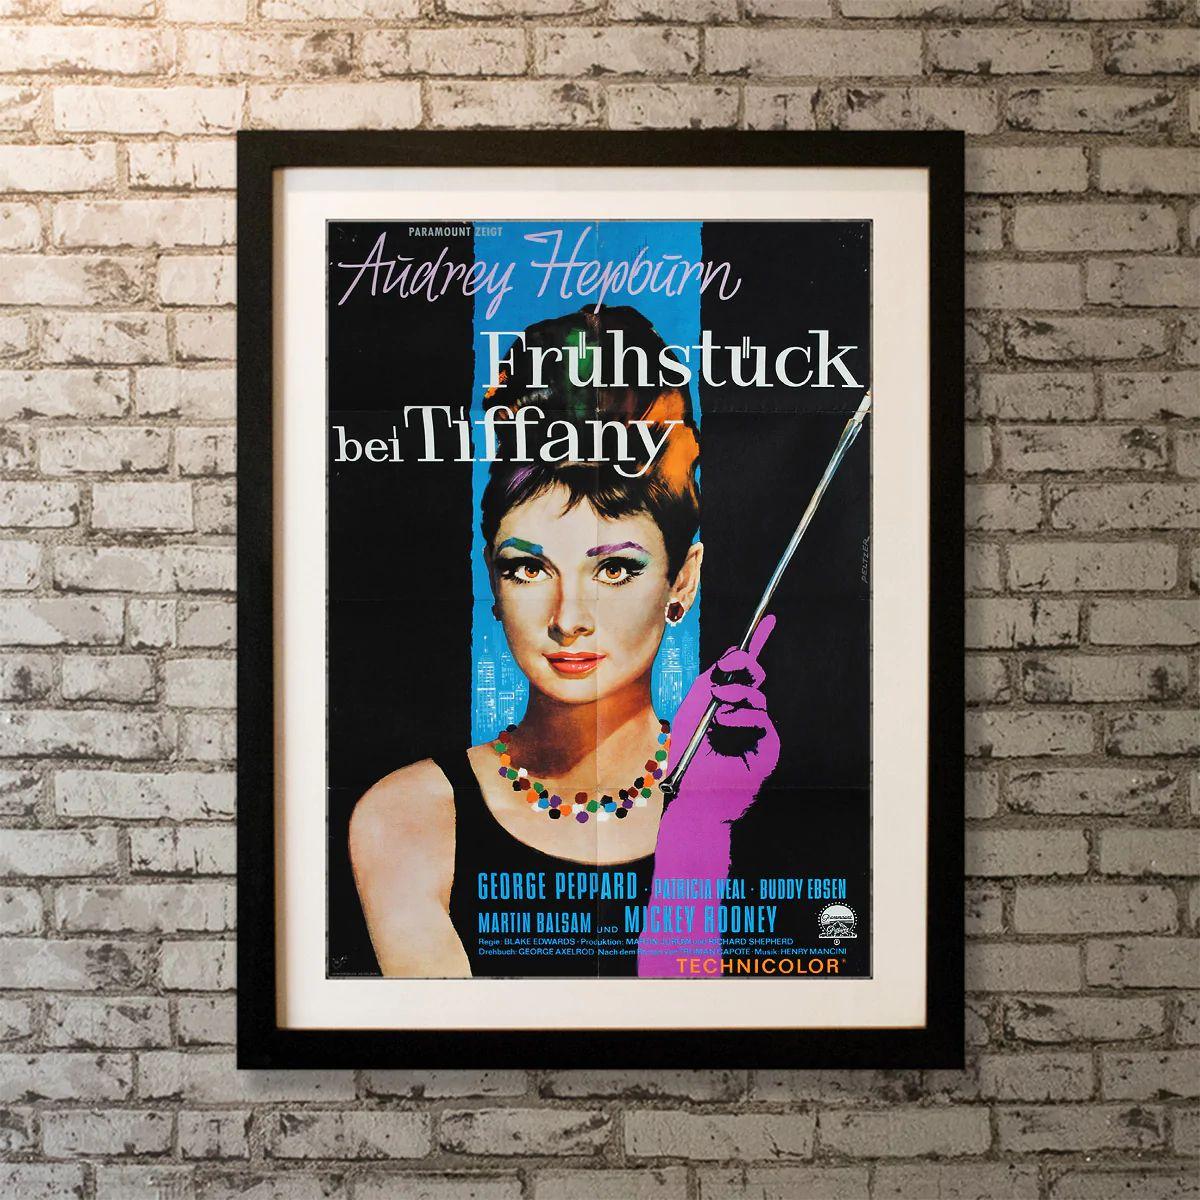 Breakfast At Tiffany's, Unframed Poster, 1961

Original German Poster (23 X 33 Inches). Holly Golightly's image is one of the most famous in movie history. It's all on display in this German poster -- the black dress, cigarette holder and gloves.